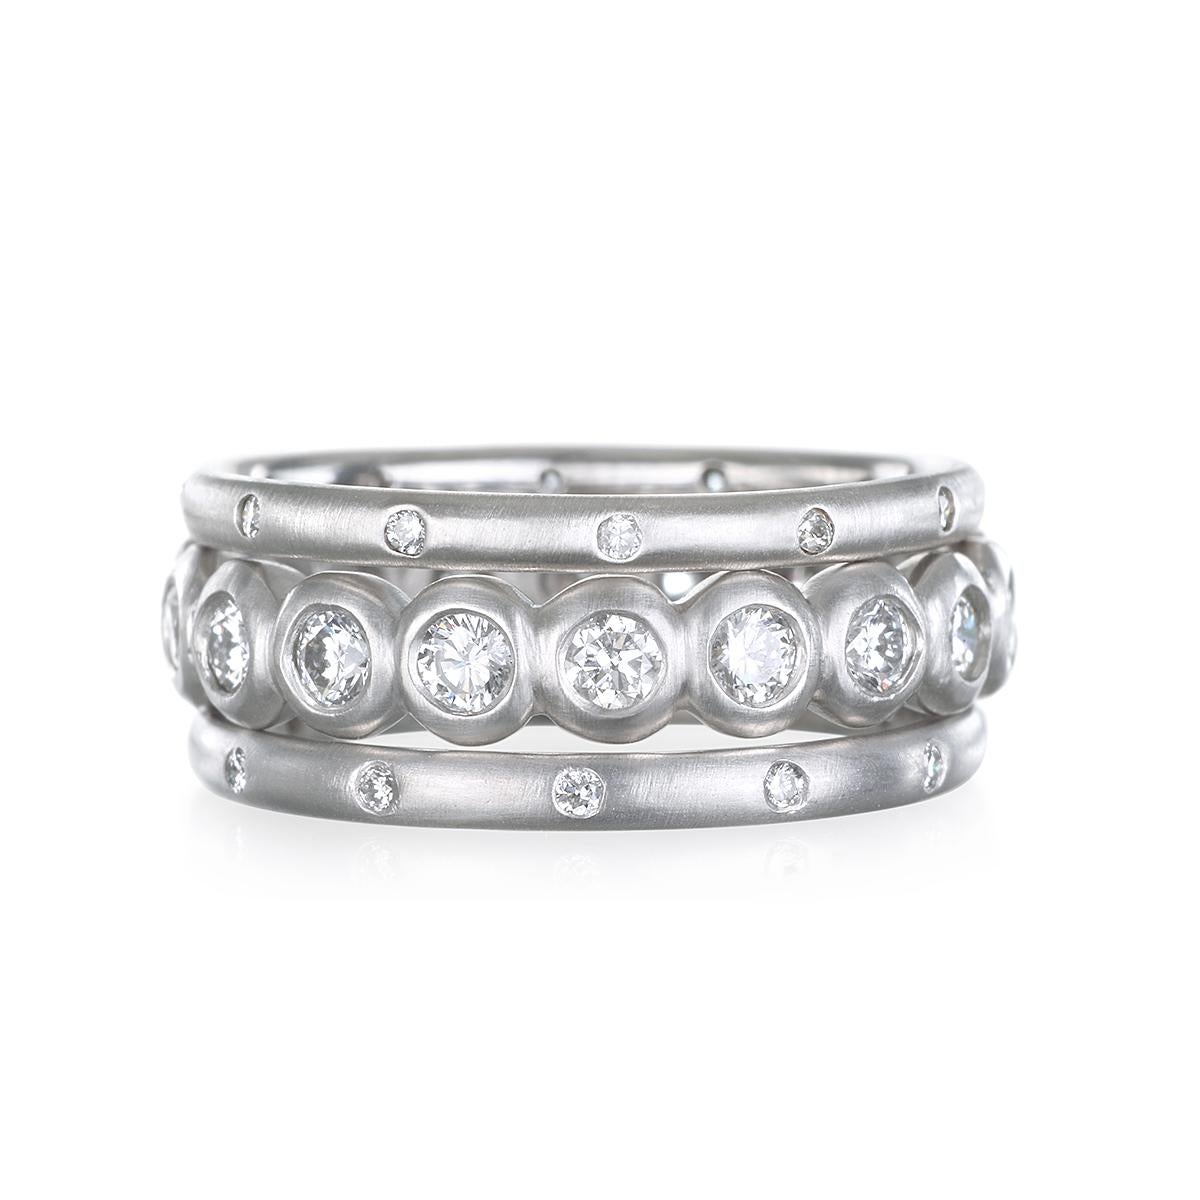 Eminently wearable, Faye Kim's Platinum Diamonde Eternity Band Ring is handcrafted with bright, round brilliant cut diamonds in a bezel setting.  A contemporary vibe that works with all styles; wear alone for a clean, sleek look or stack with others